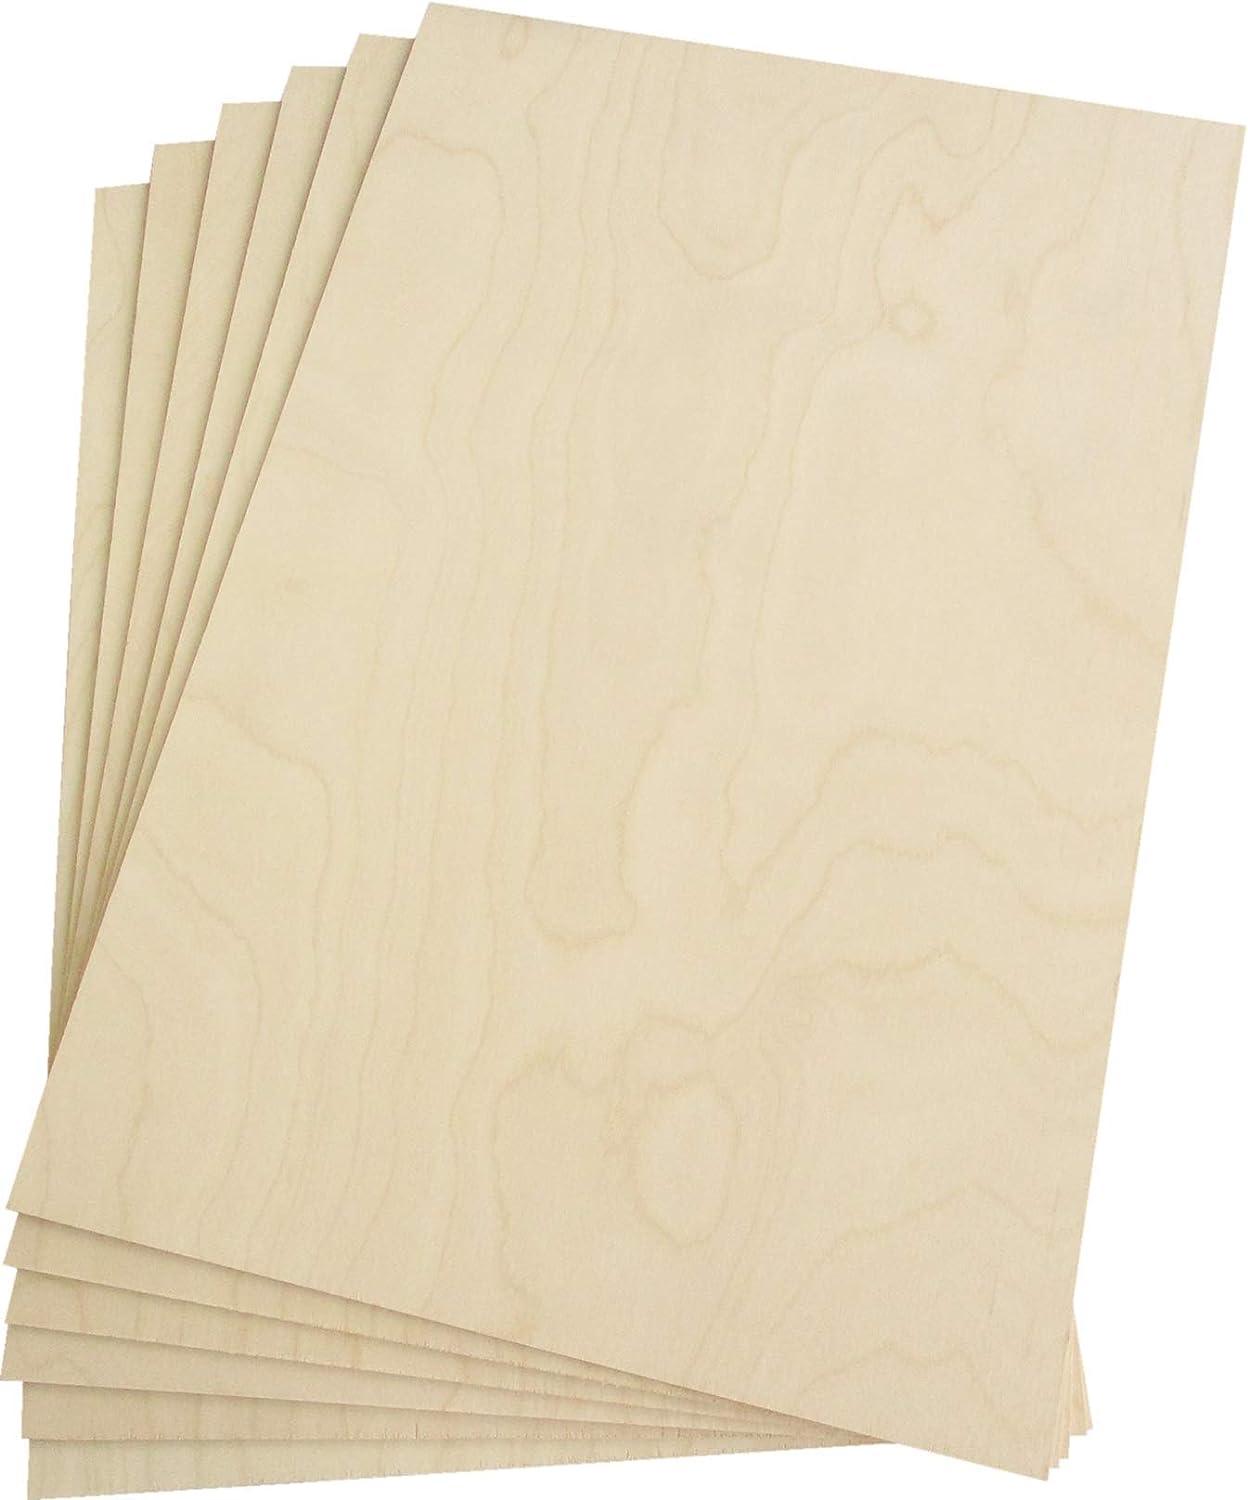 6mm, 1/4 x 8 x 8 Unfinished Baltic Birch plywood sheets